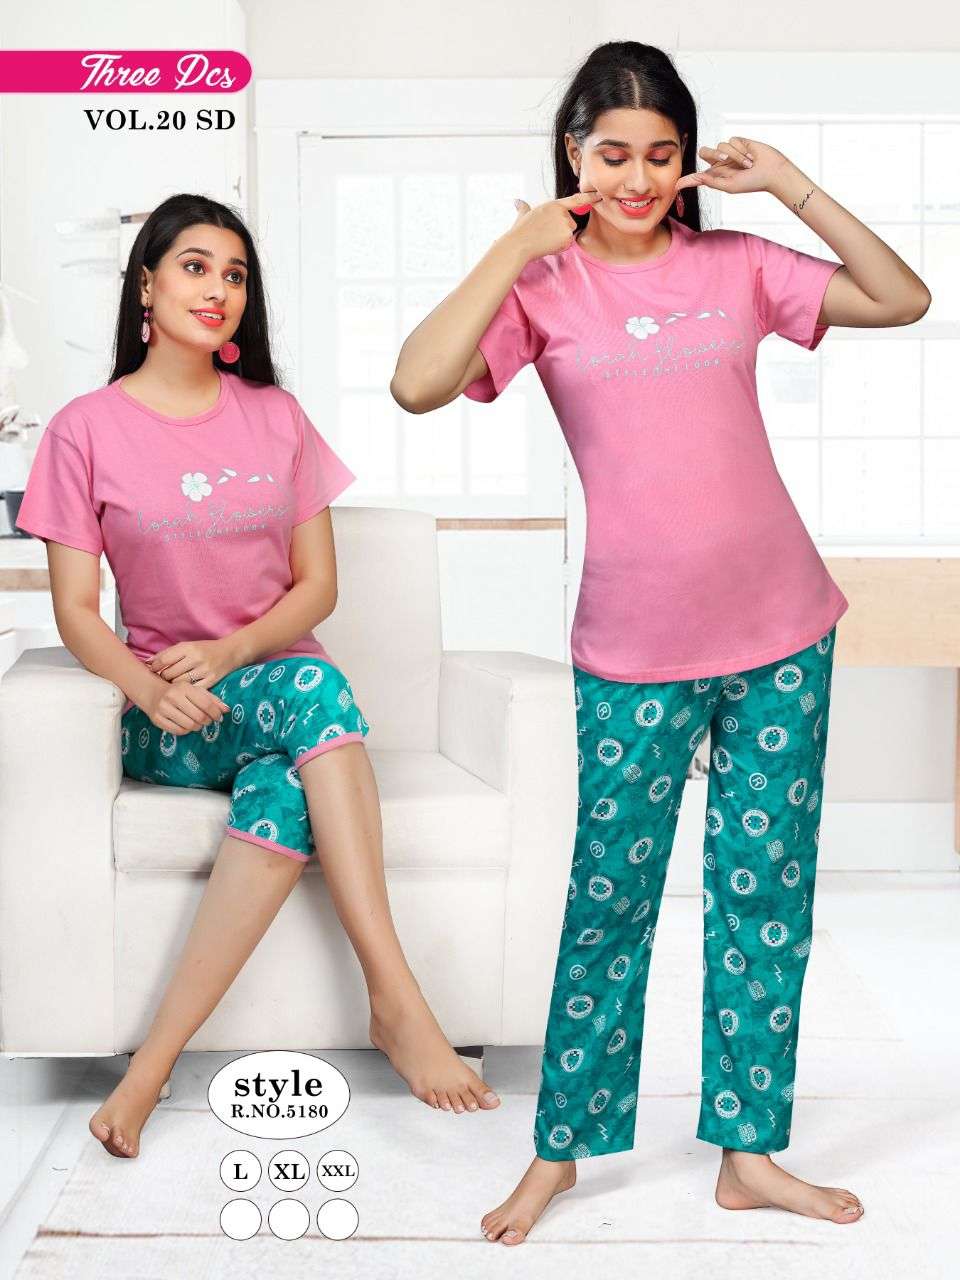 SUMER SPECIAL THREE PCS VOL.20 SD Heavy Shinker Hosiery CottonNight Suits With Pocket (1 top , 1 capri & 1 full pant) CATALOG WHOLESALER BEST RATE